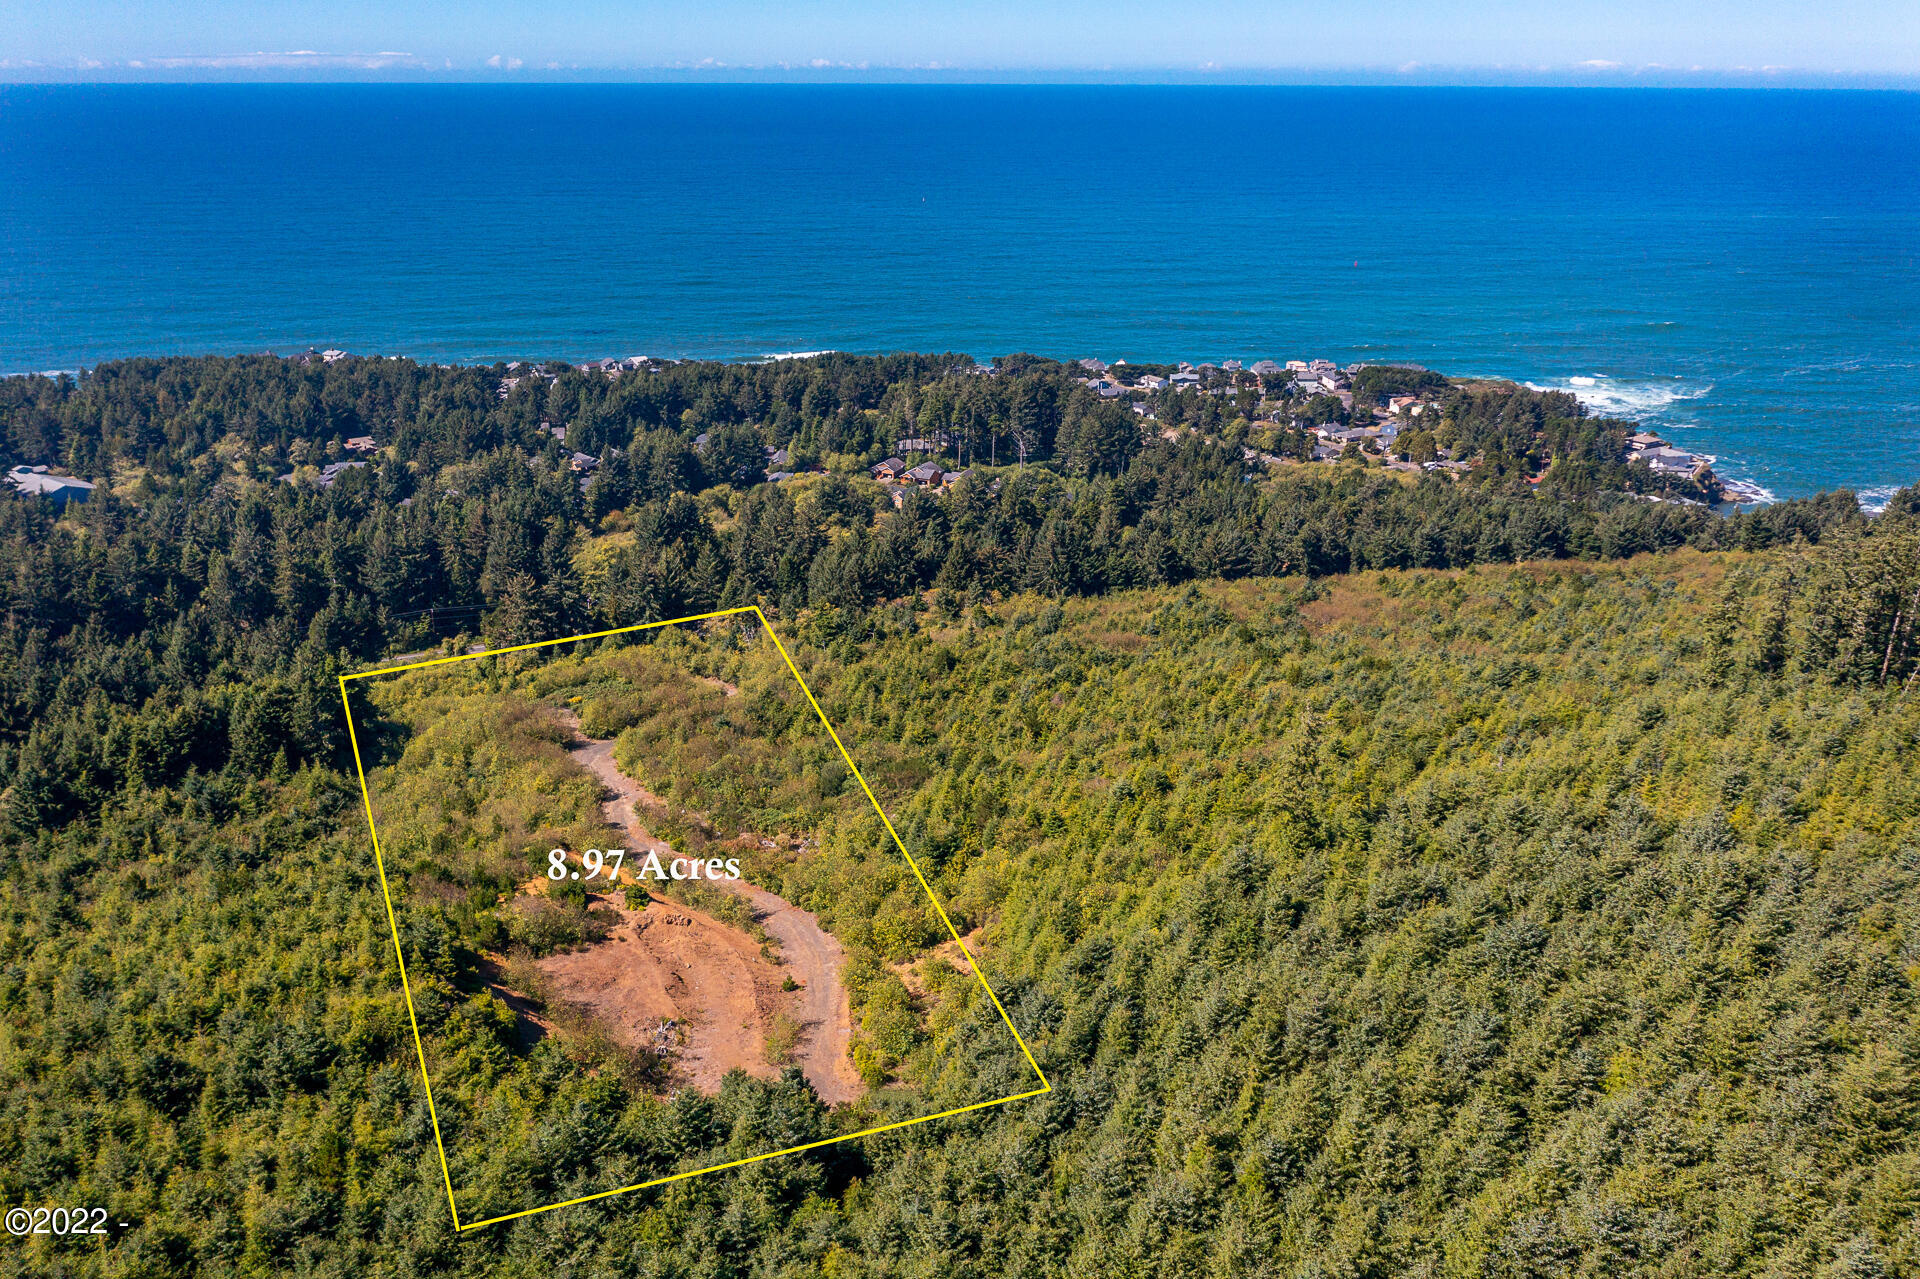 1348 S Highway 101 Depoe Bay, Gleneden Beach, Lincoln City, Newport, Otis, Rose Lodge, Seal Rock, Waldport, Yachats, To Home Listings - Amy Plechaty, Emerald Coast Realty Real Estate, homes for sale, property for sale